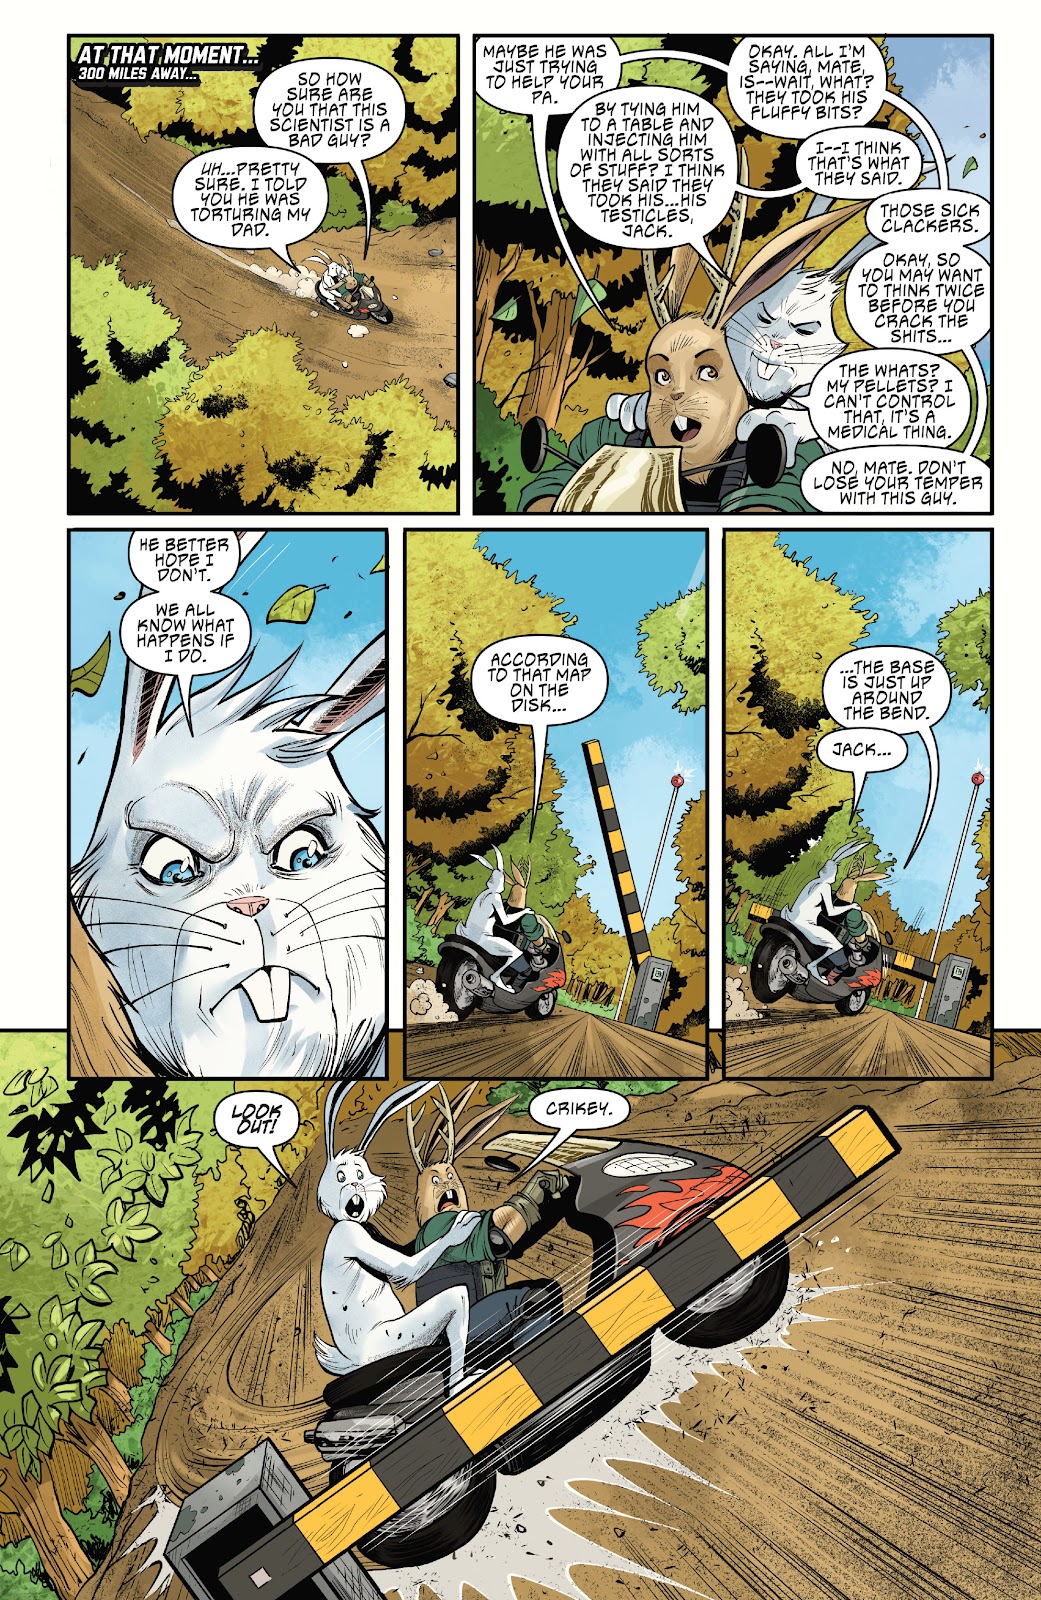 Man Goat & the Bunnyman: Green Eggs & Blam issue 2 - Page 20